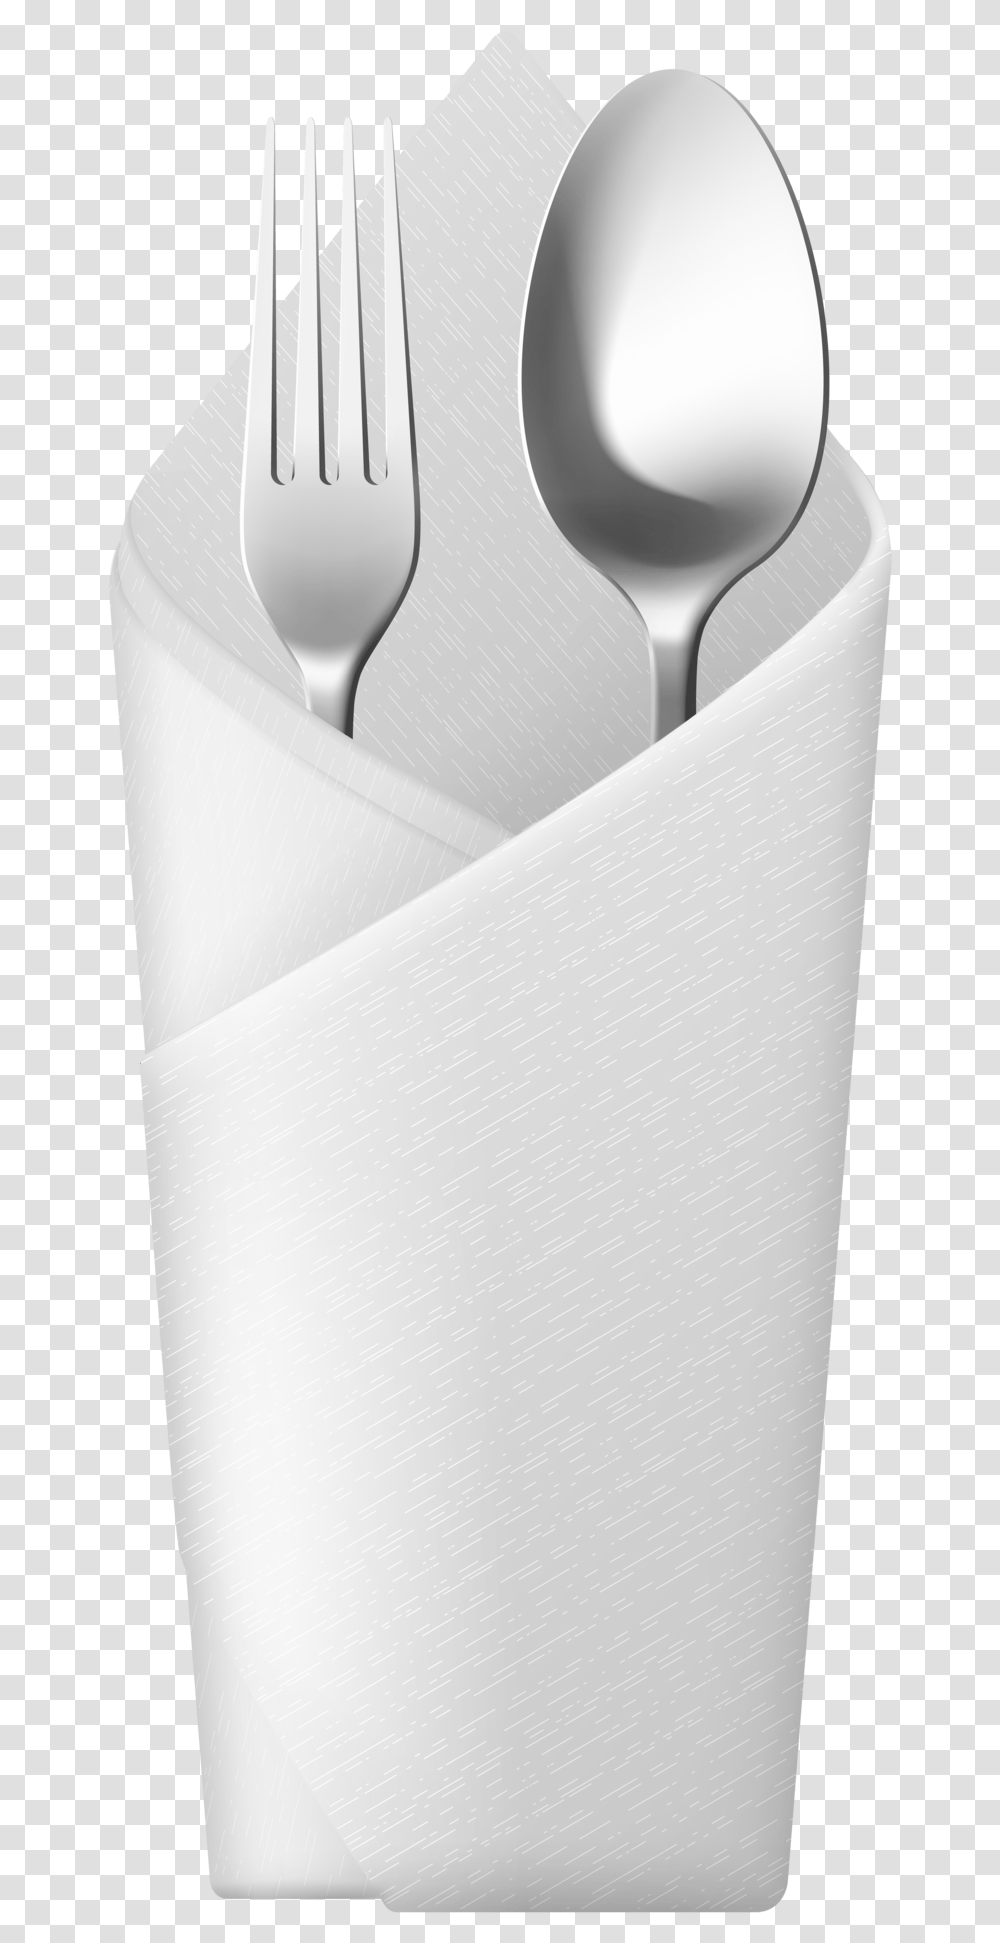 Spoon And Fork In Napkin Mobile Phone, Paper, Linen, Home Decor, Towel Transparent Png